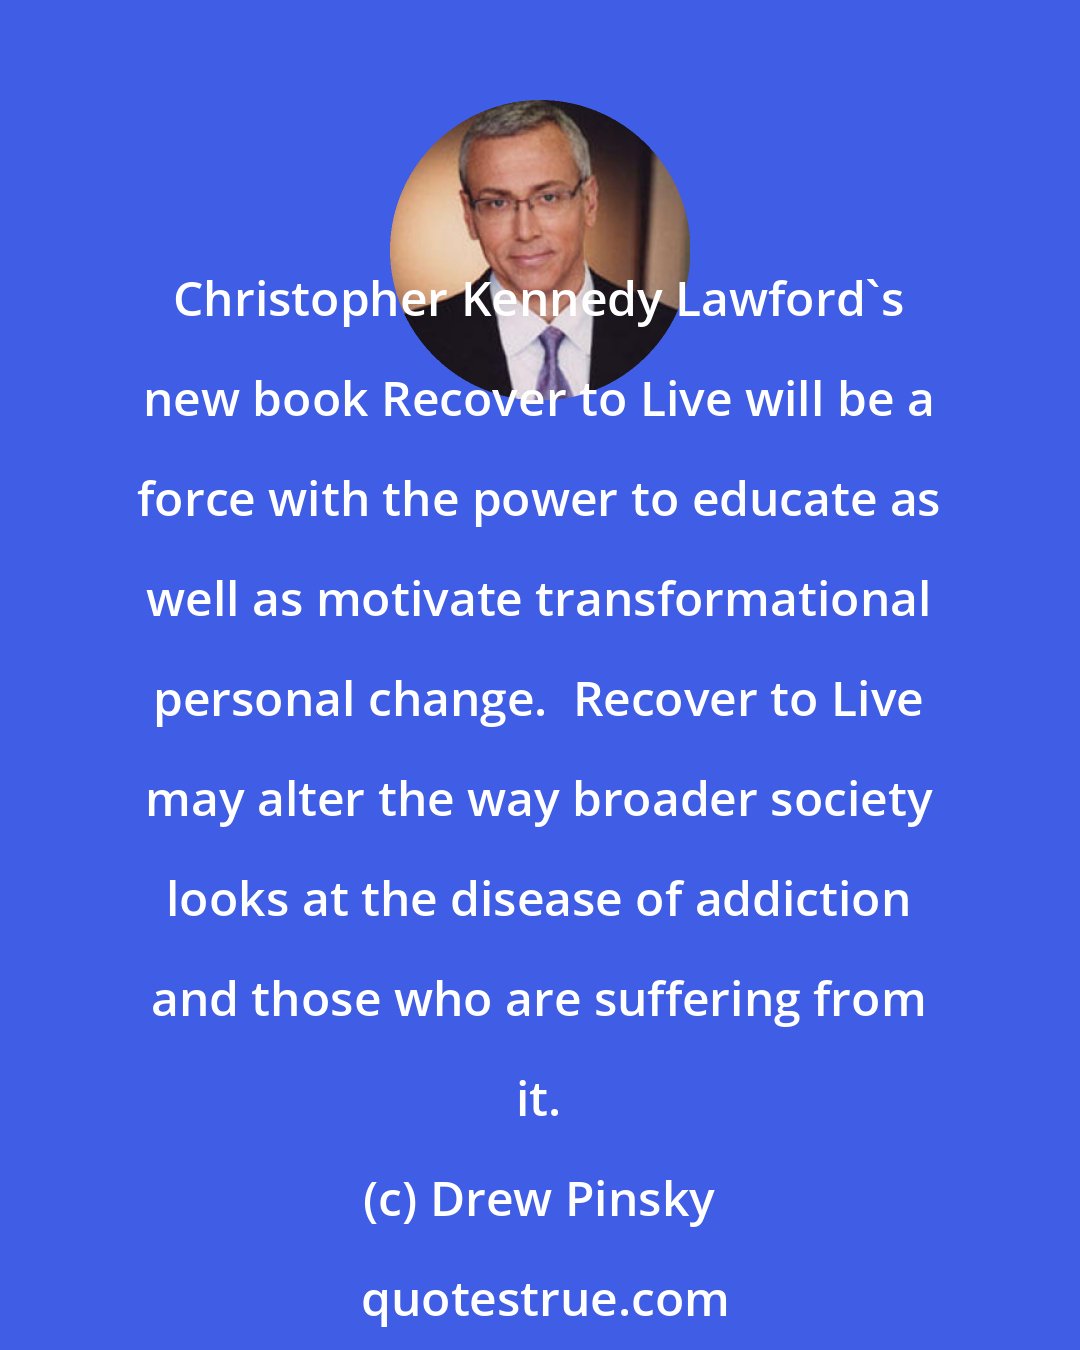 Drew Pinsky: Christopher Kennedy Lawford's new book Recover to Live will be a force with the power to educate as well as motivate transformational personal change.  Recover to Live may alter the way broader society looks at the disease of addiction and those who are suffering from it.